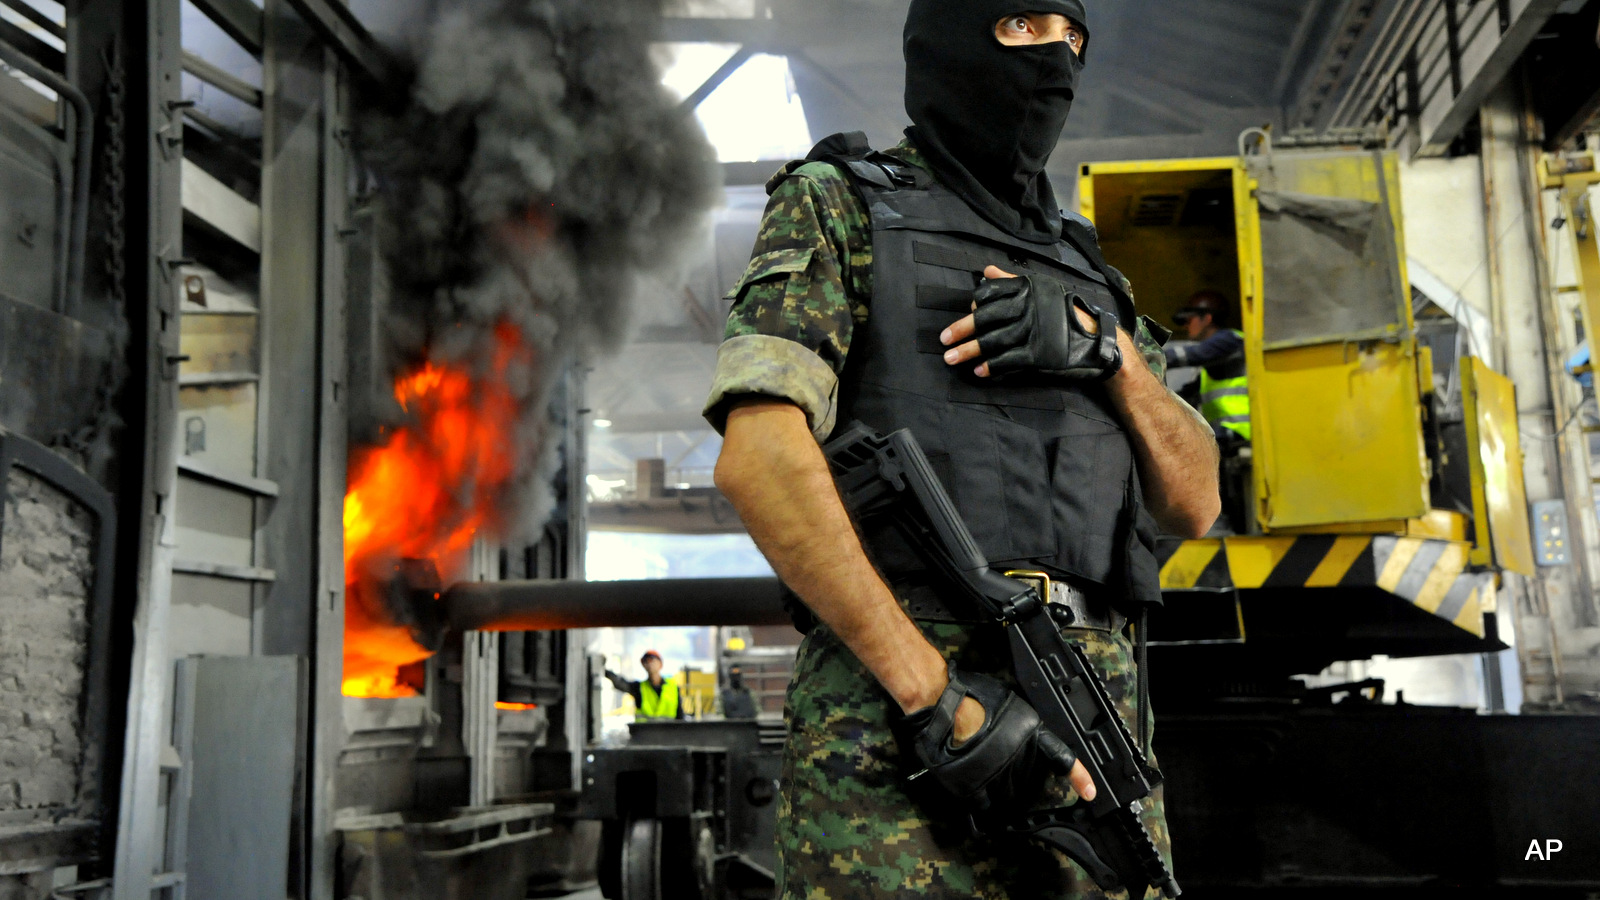 An Uzbekistan National Security Service officer stands guard, as drugs are burnt behind him